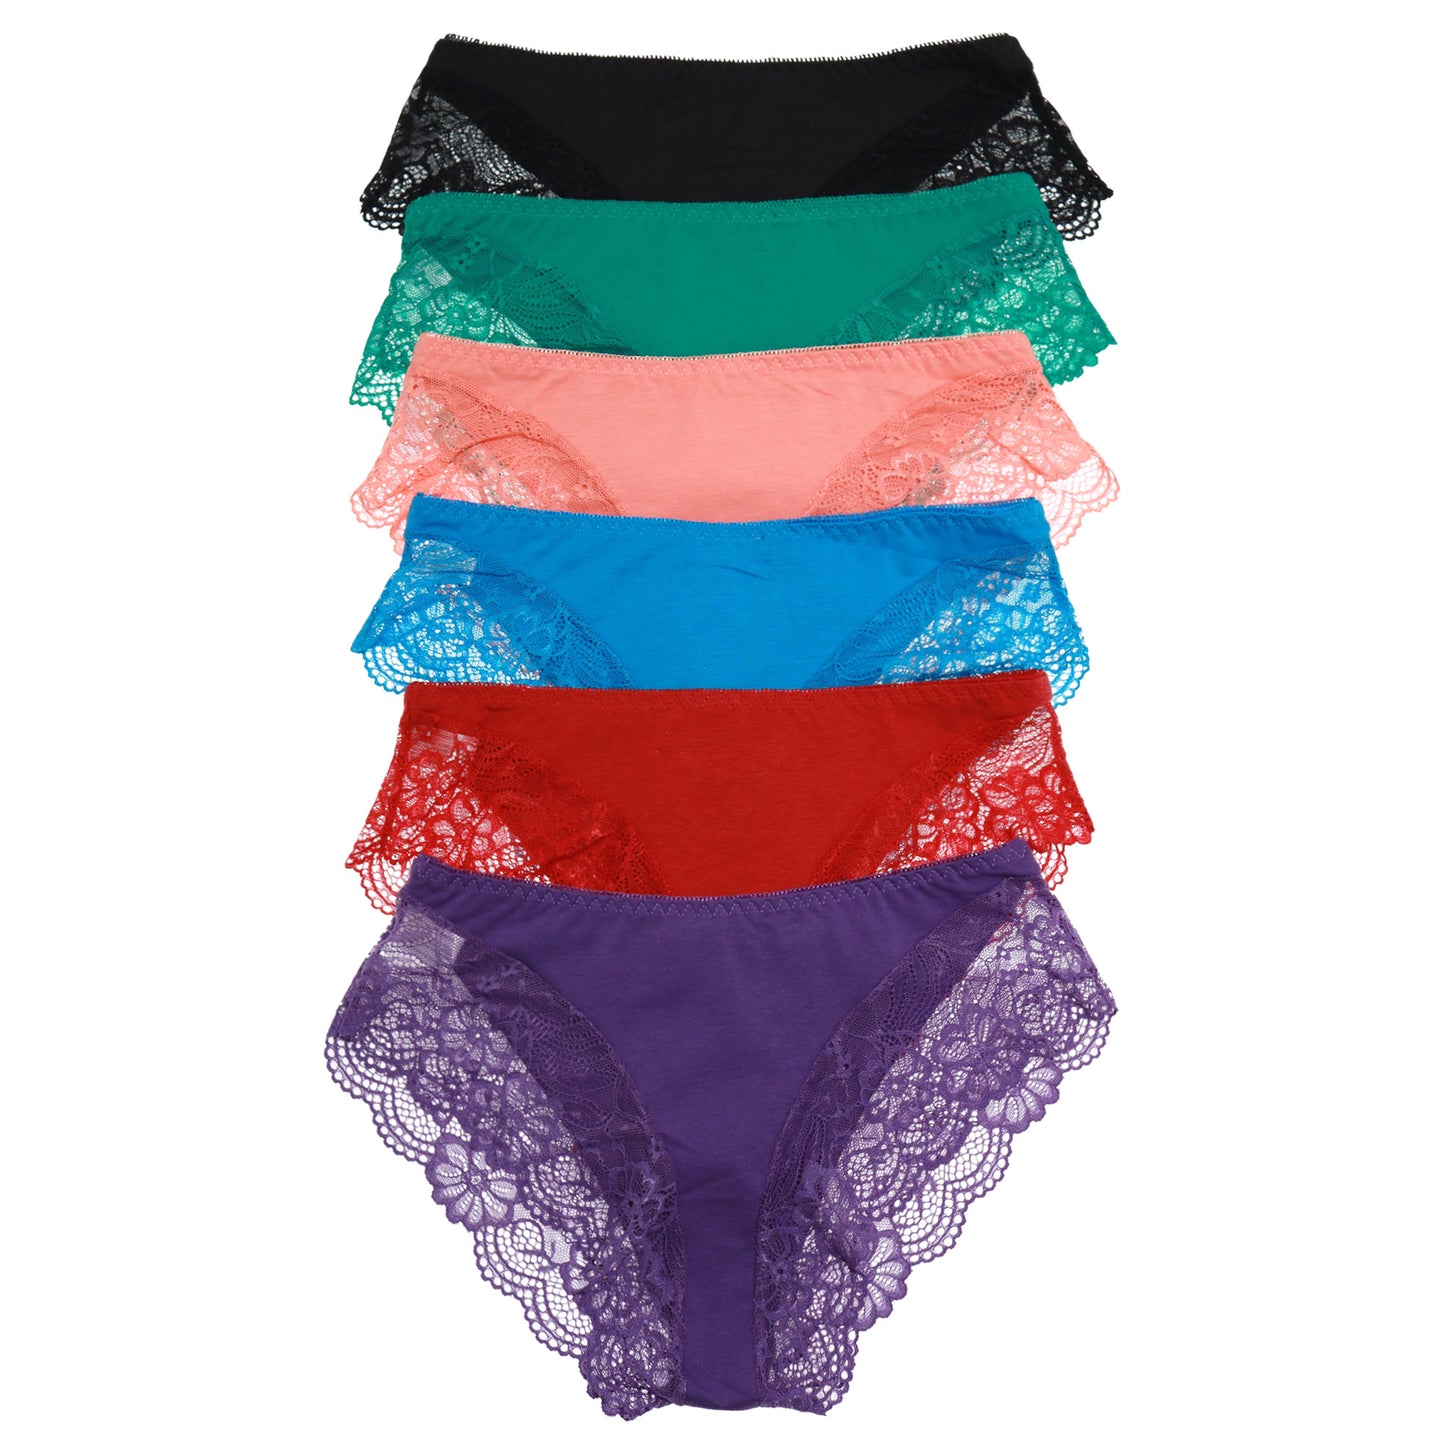 Cotton Hiphugger Panties with Cheeky Back Lace (6-Pack)